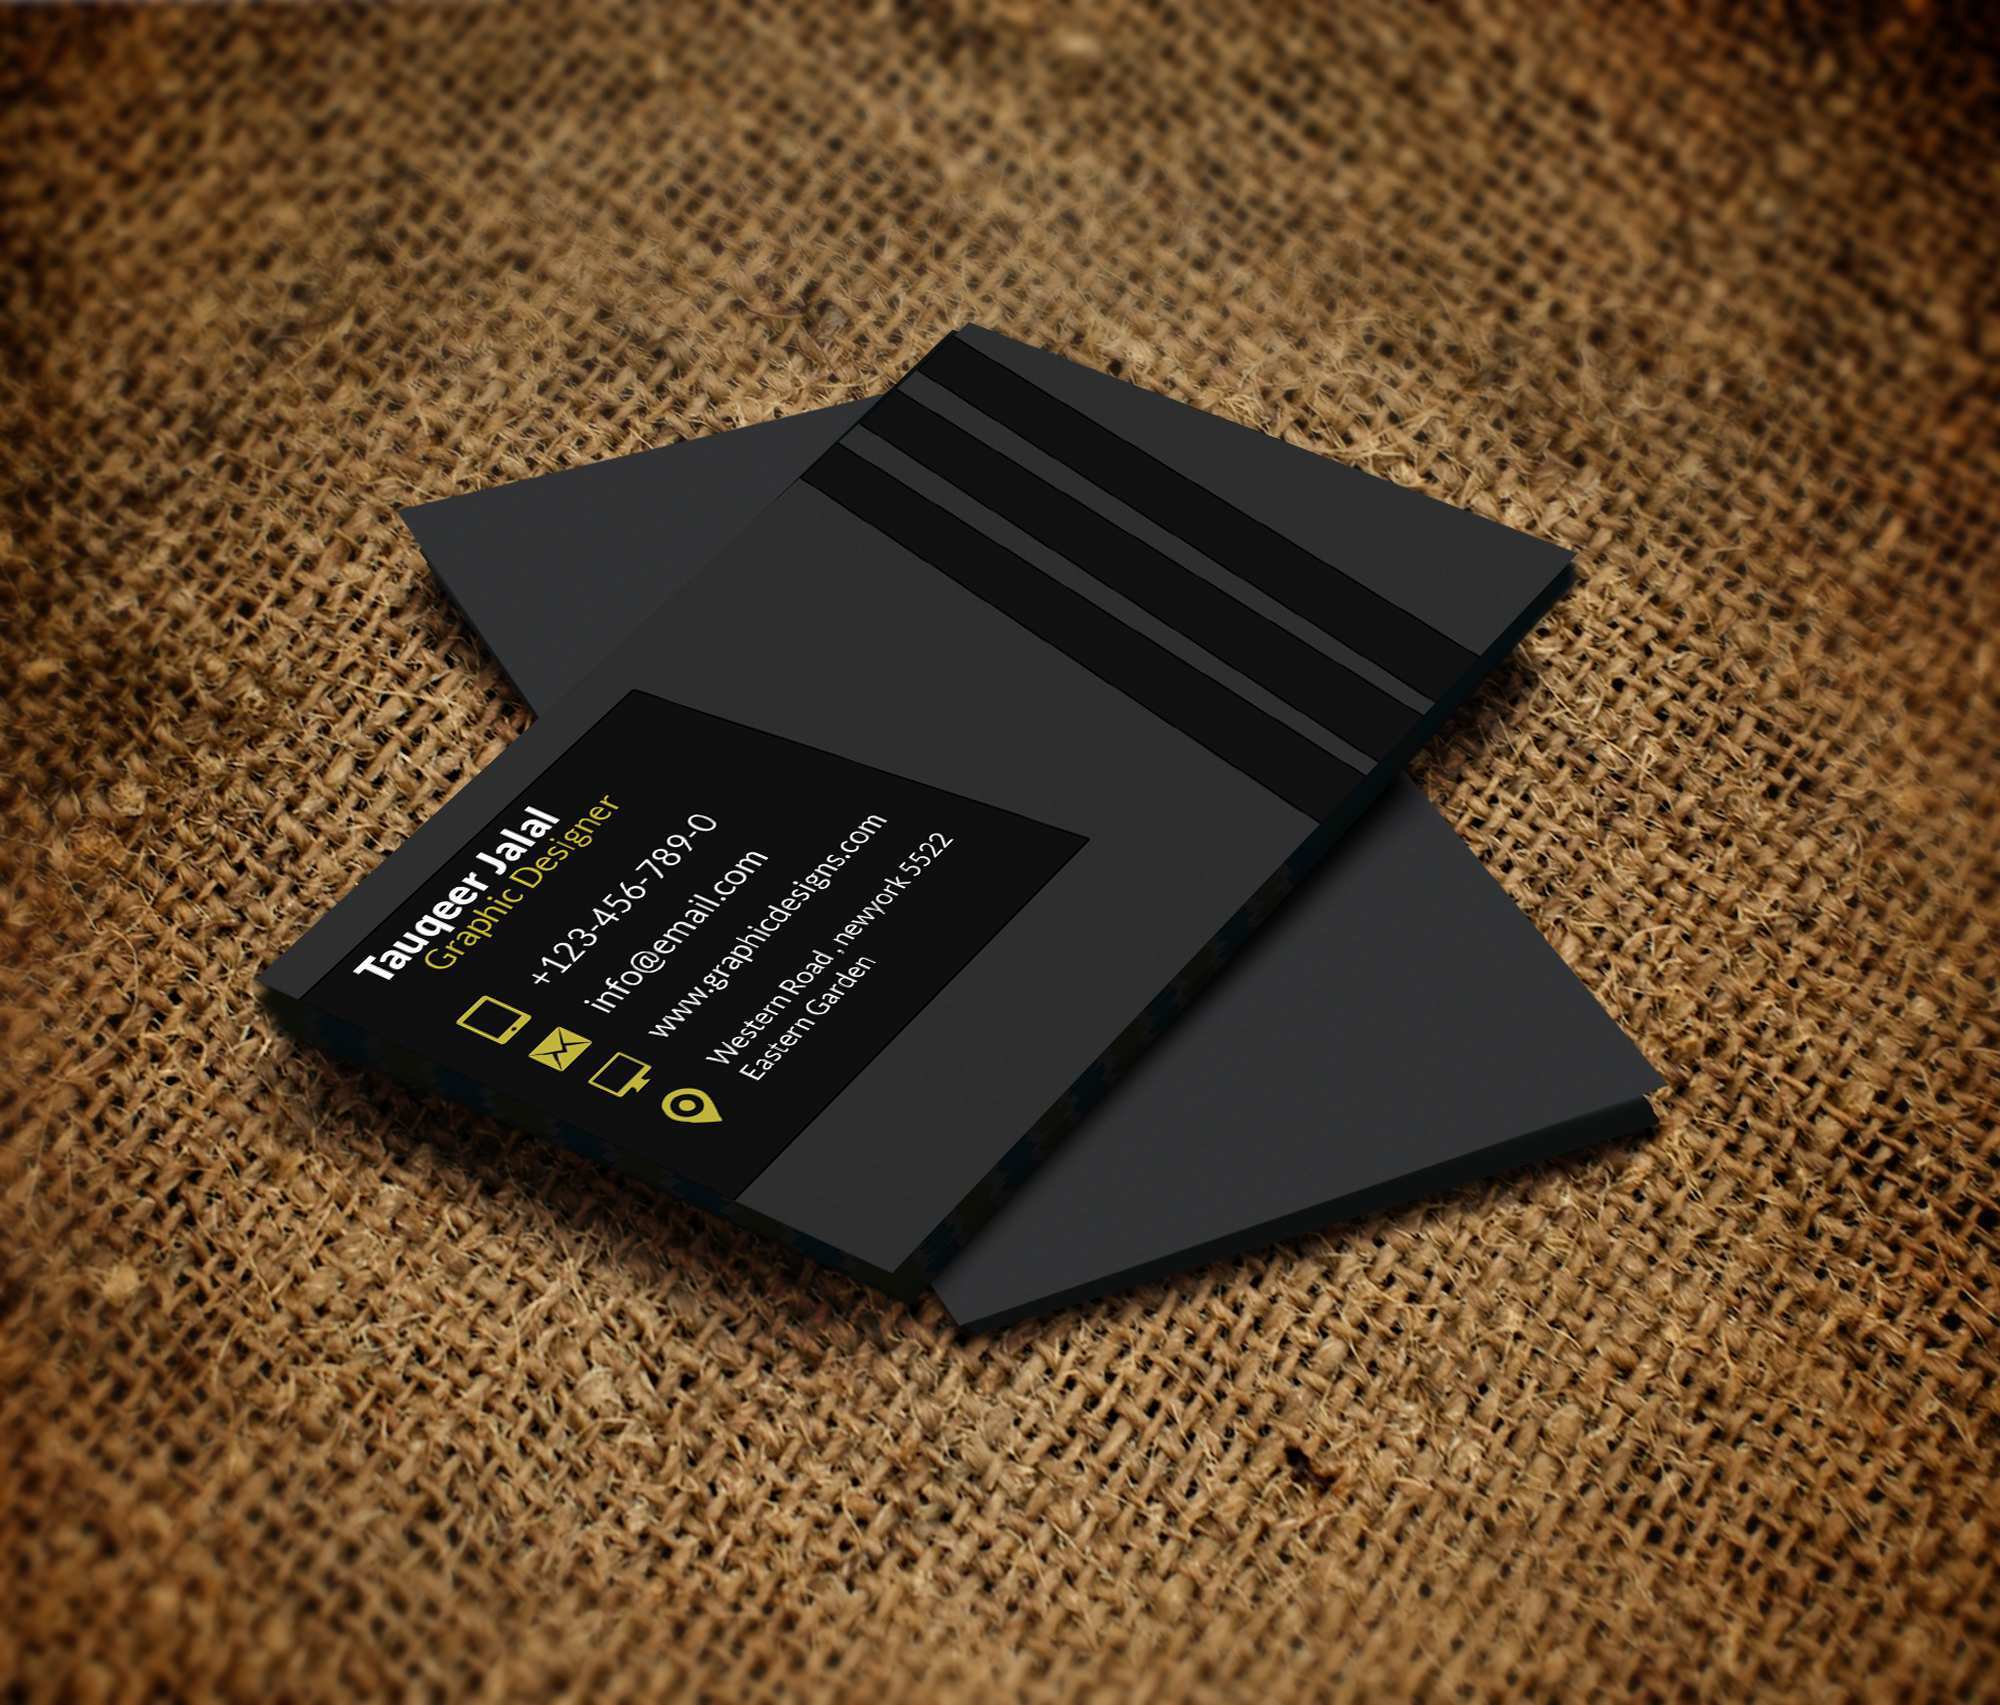 50 Printable Business Card Templates Free Download For Photoshop Maker with Business Card Templates Free Download For Photoshop